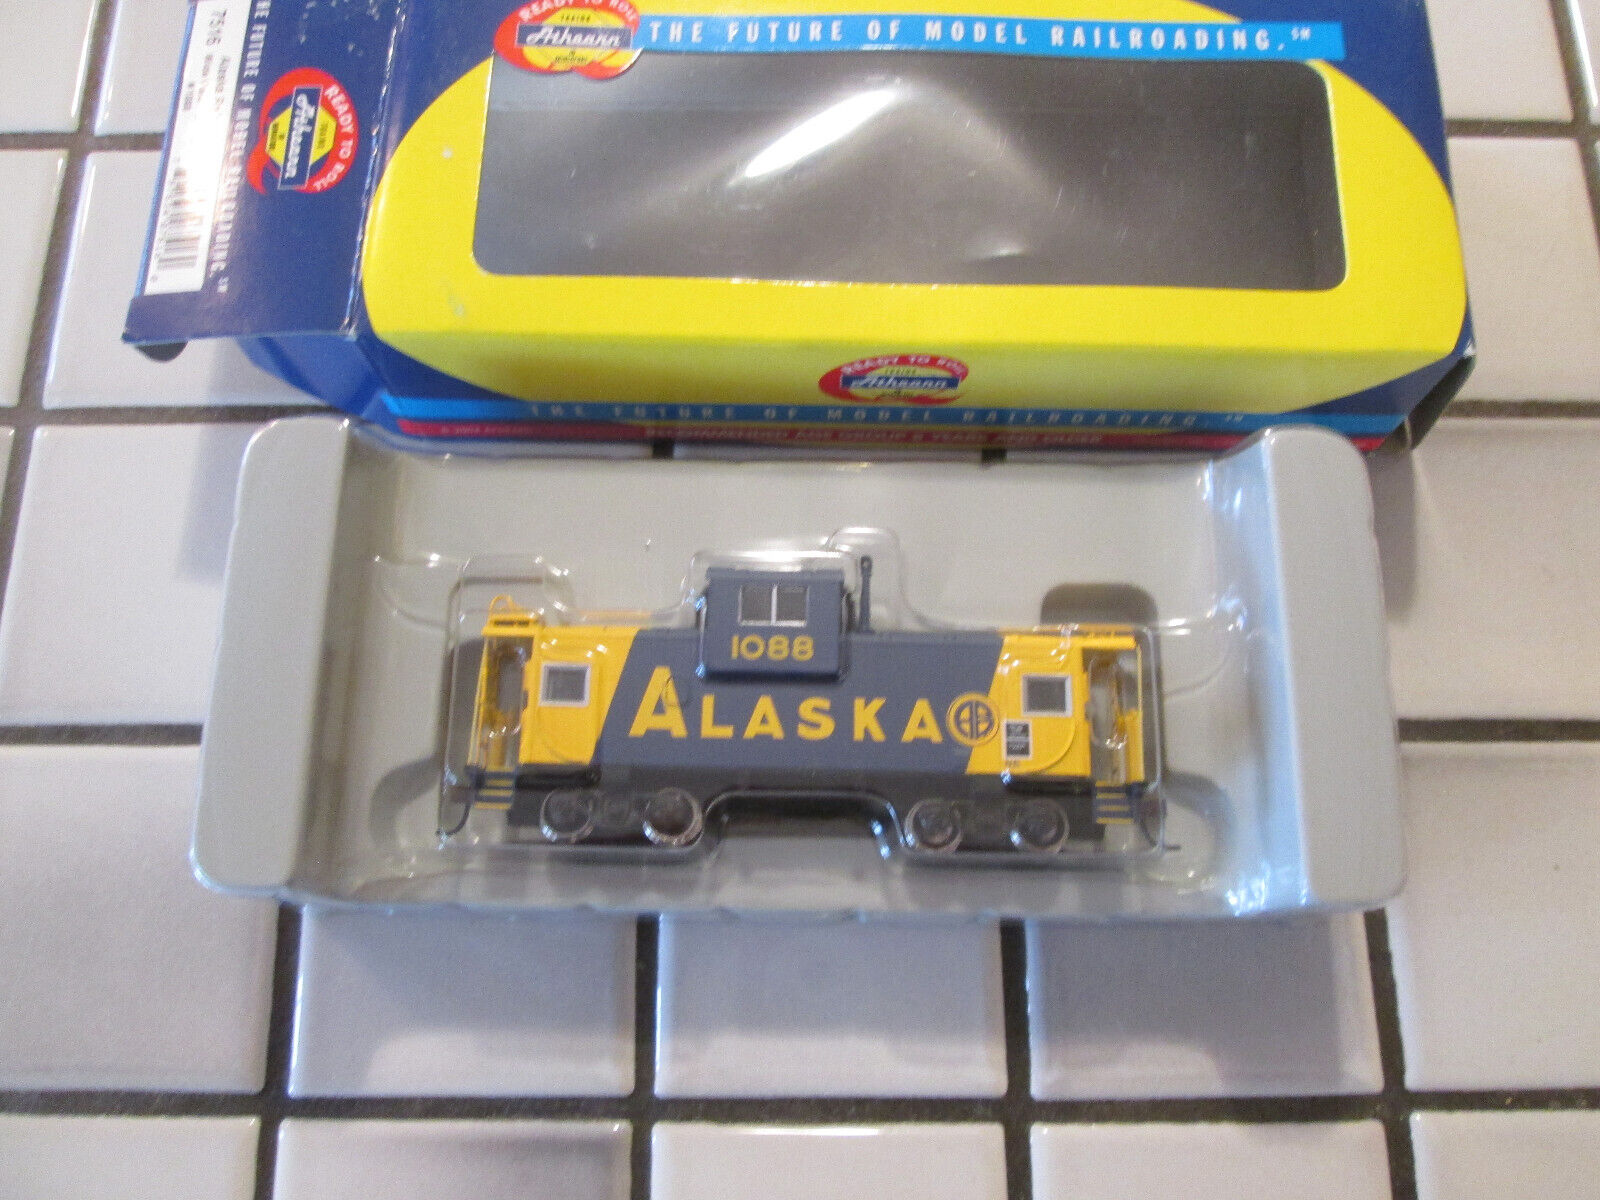 athearn ready to roll ALASKA wide vision caboose car HO scale